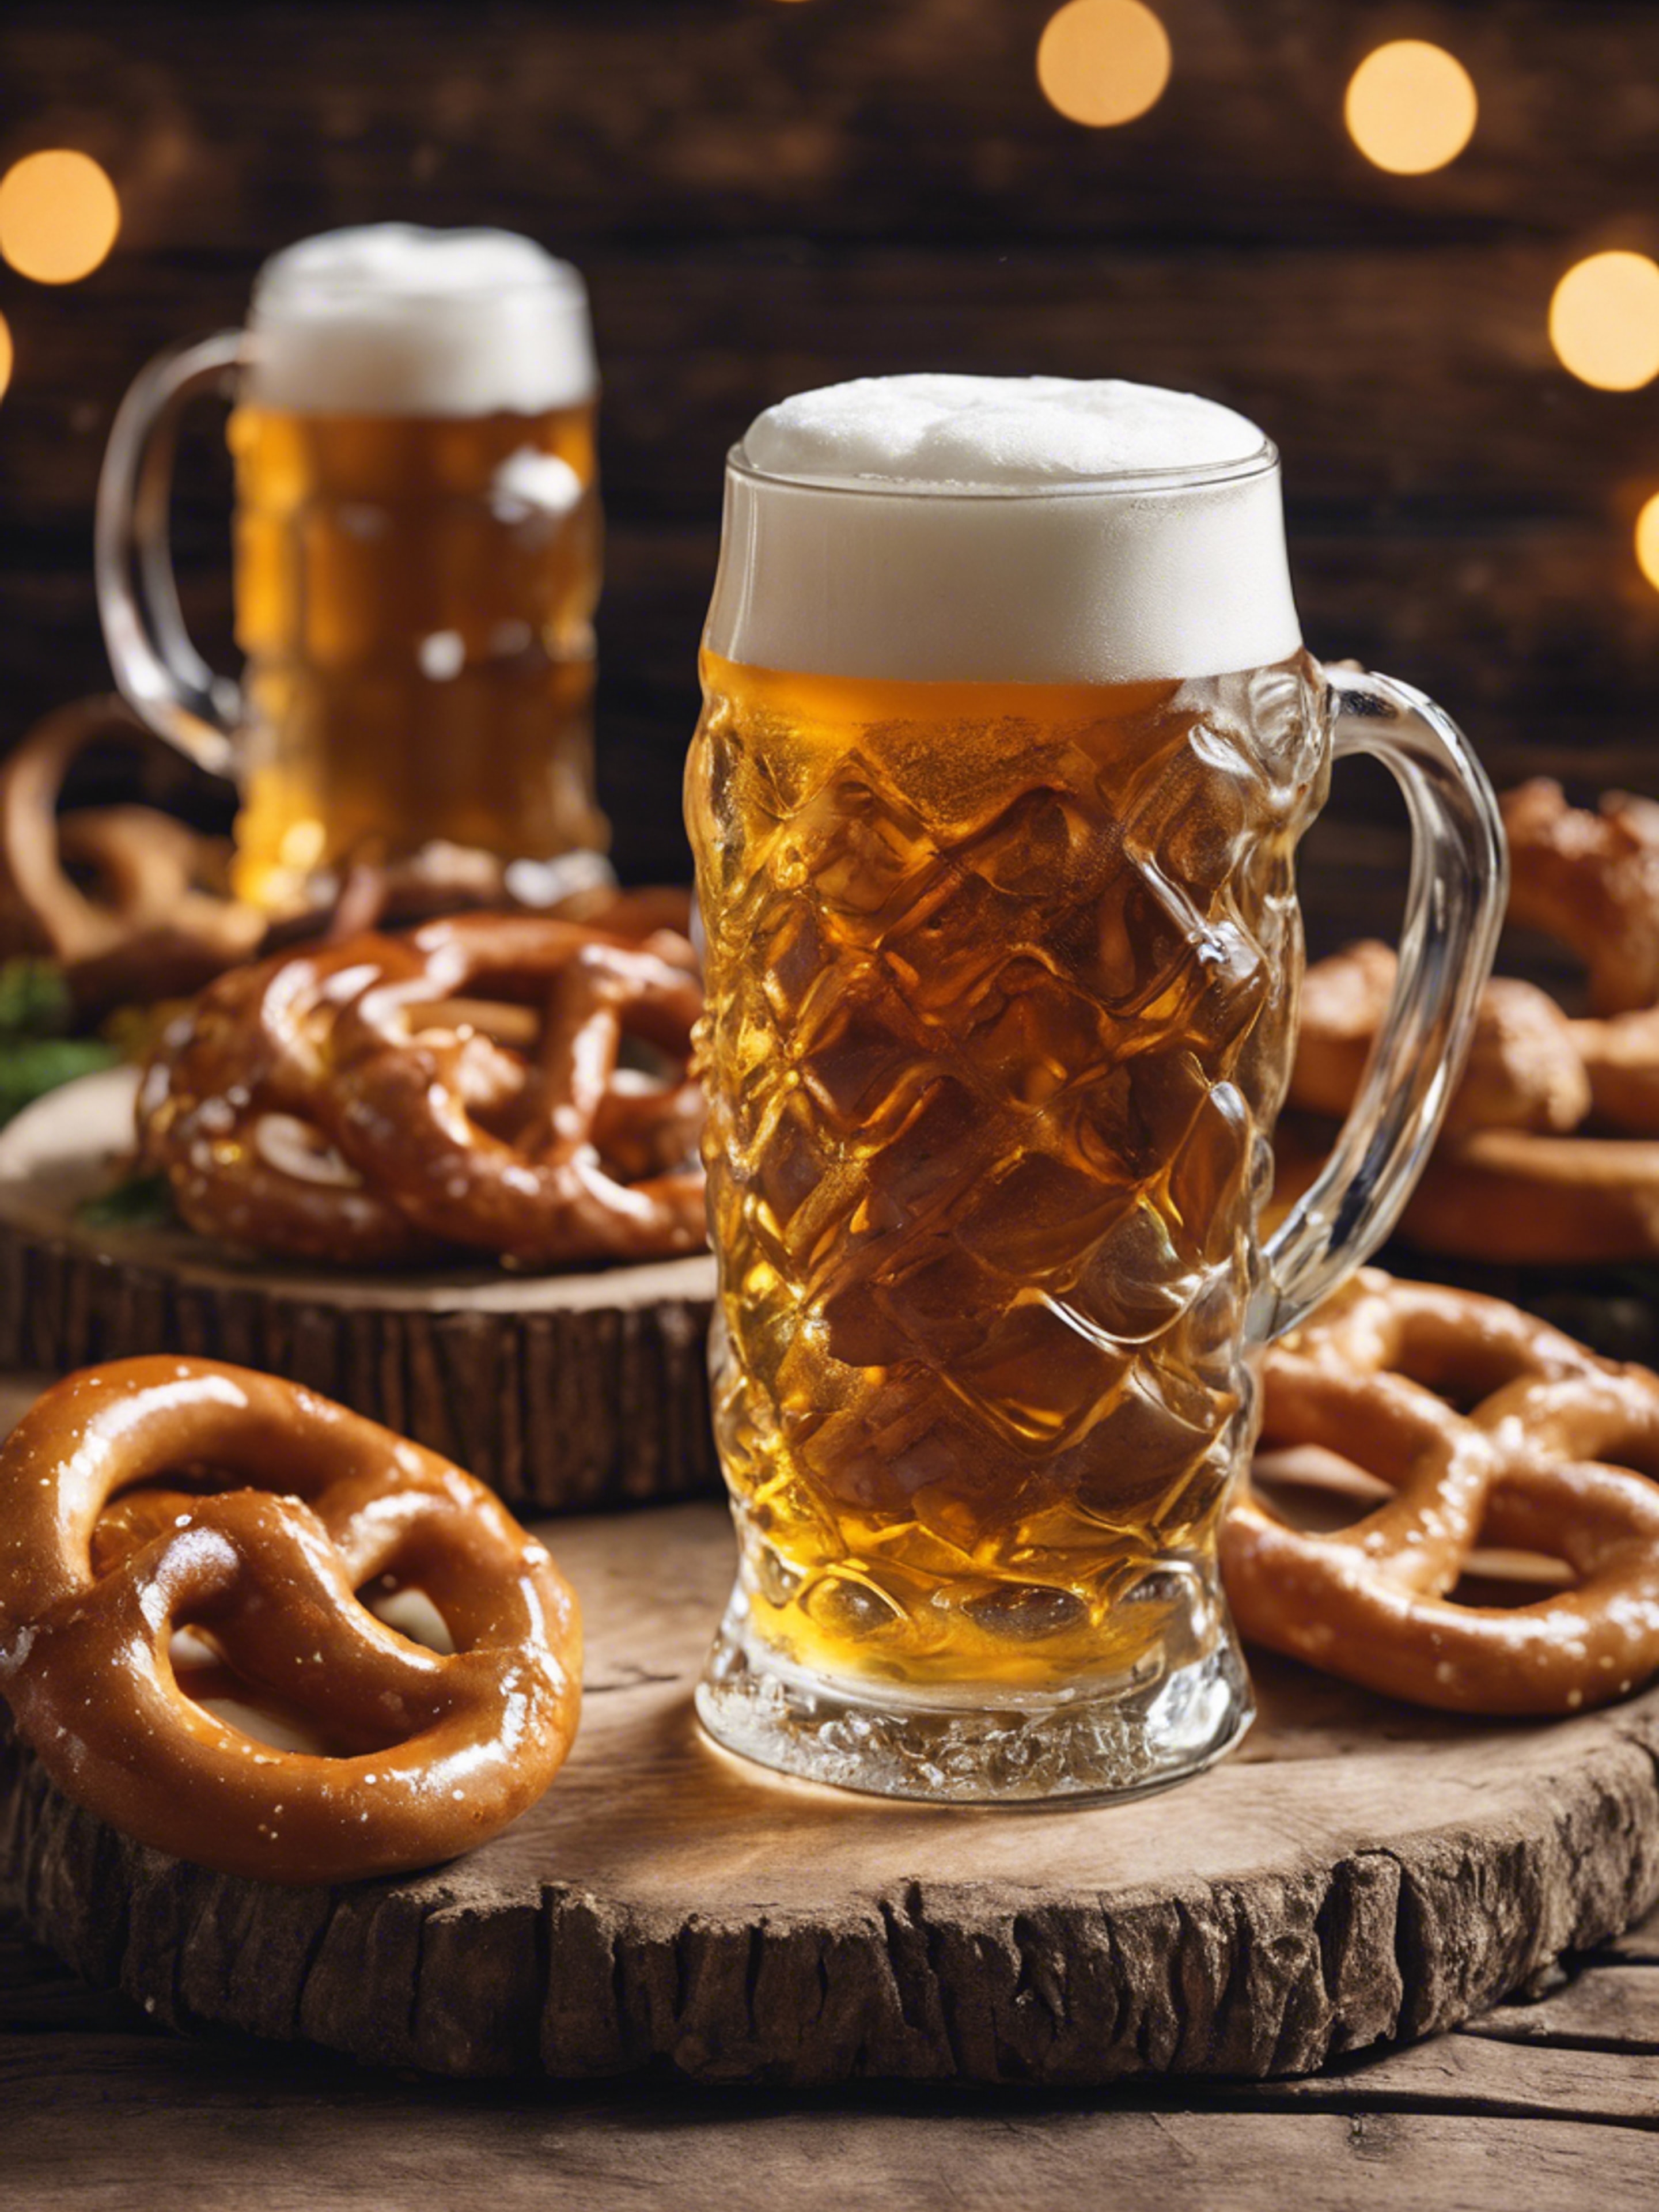 A foamy German beer, pretzels, and other Oktoberfest traditional foods on a rustic wooden table. Sfondo[8867ca72213c4237bd6d]